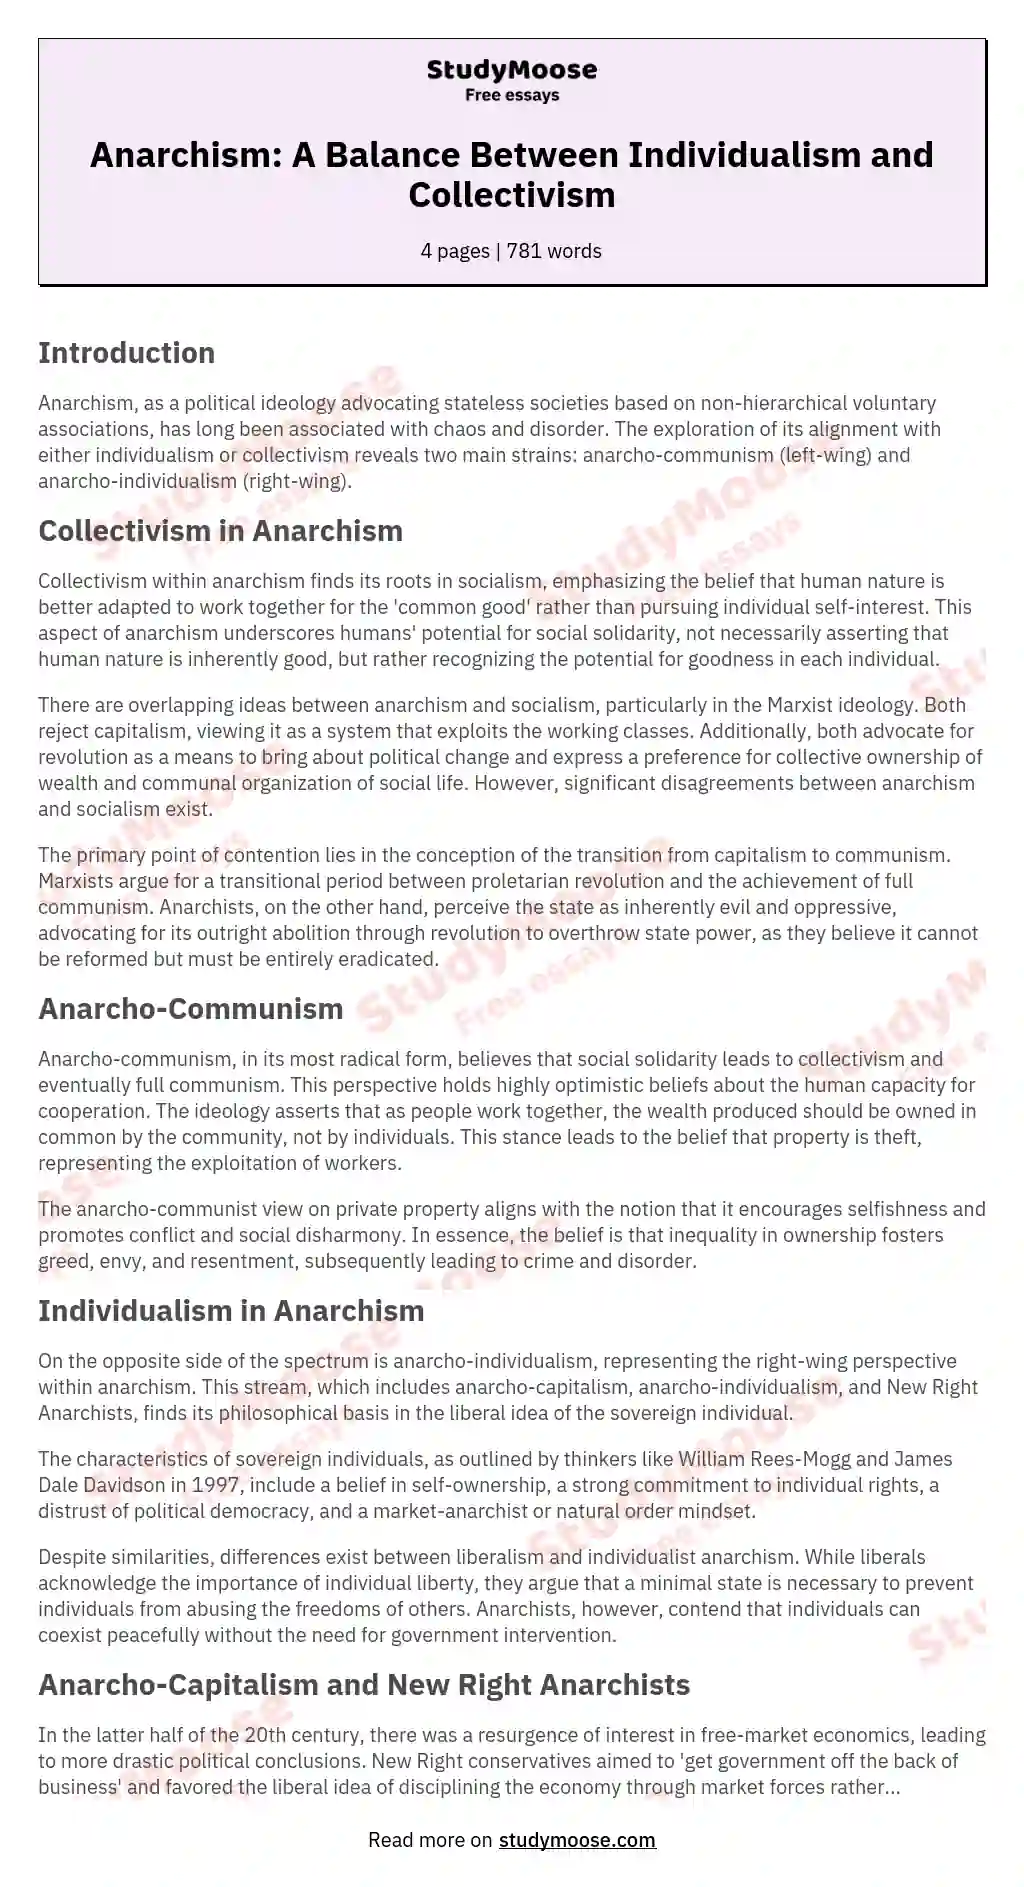 Anarchism: A Balance Between Individualism and Collectivism essay